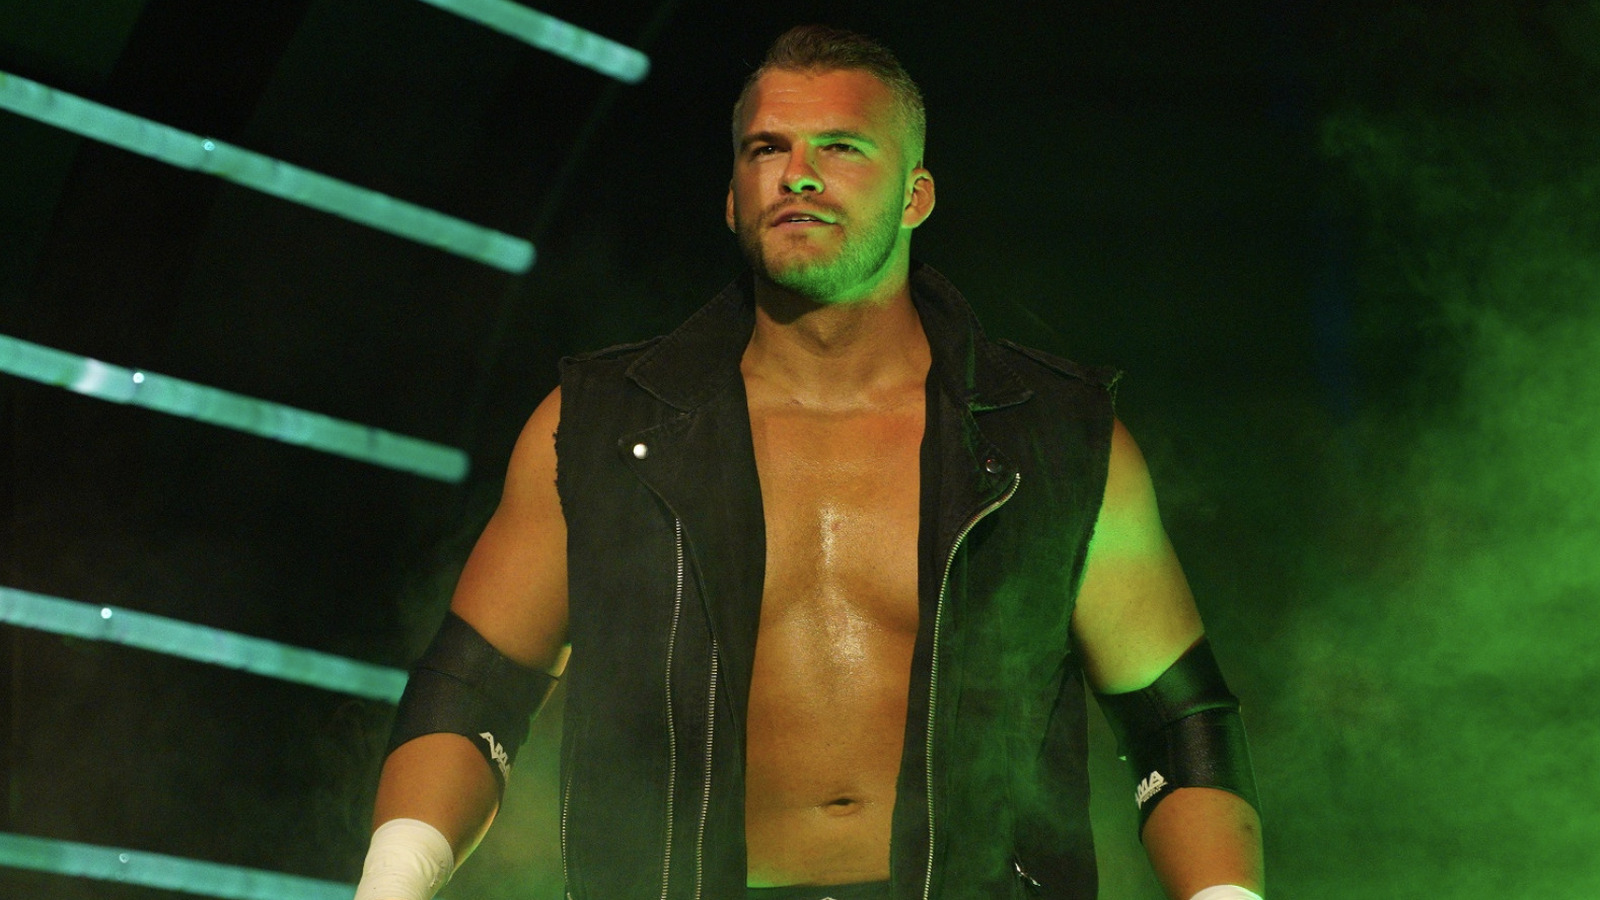 More Details On 'Jersey Shore' Star's Zack Clayton AEW Contract